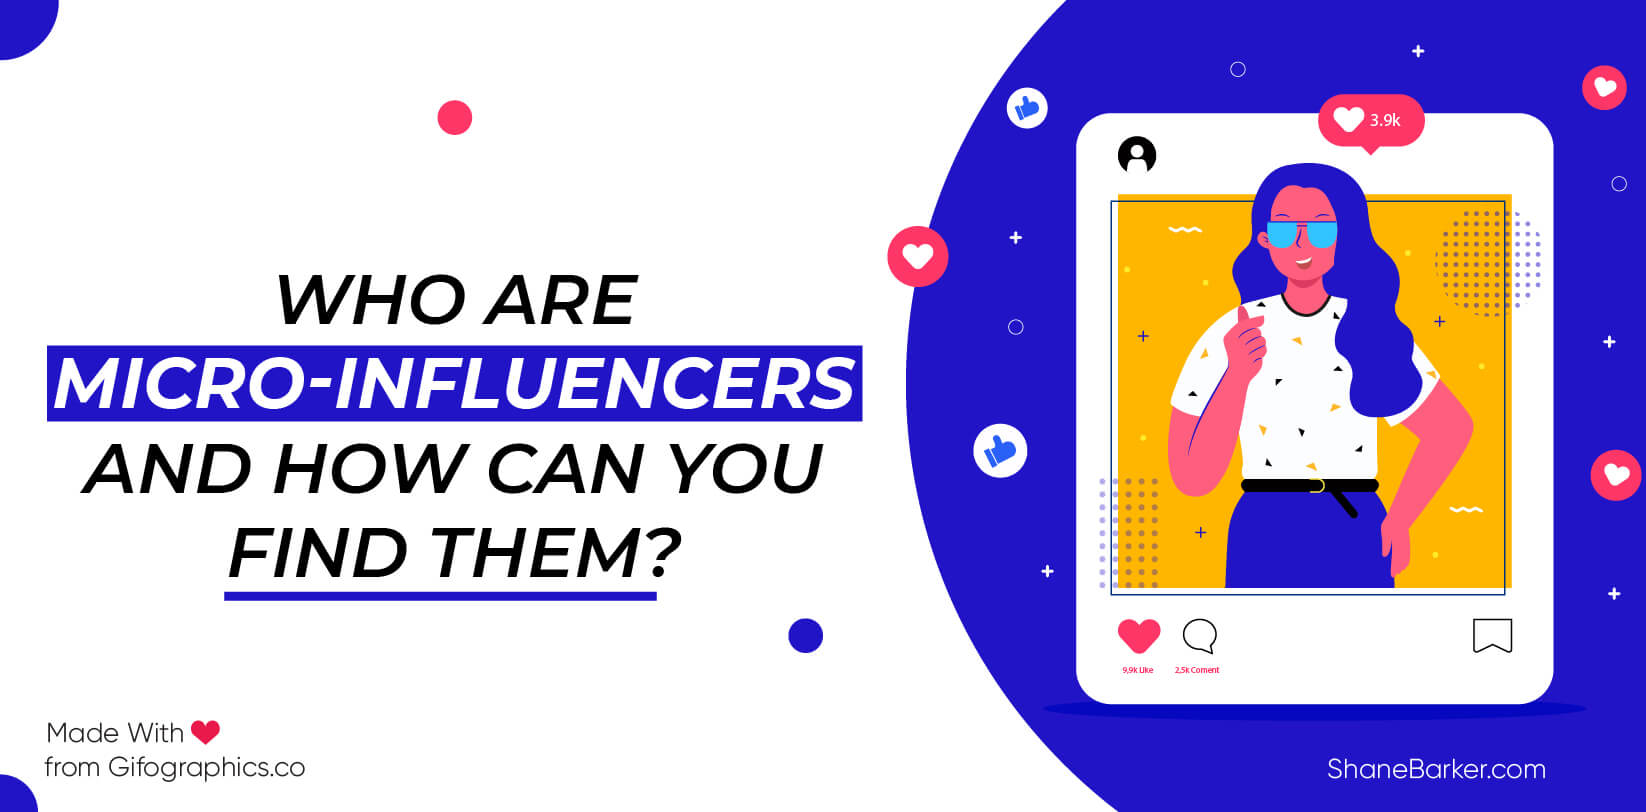 Who Are Micro-Influencers and How Can You Find Them?